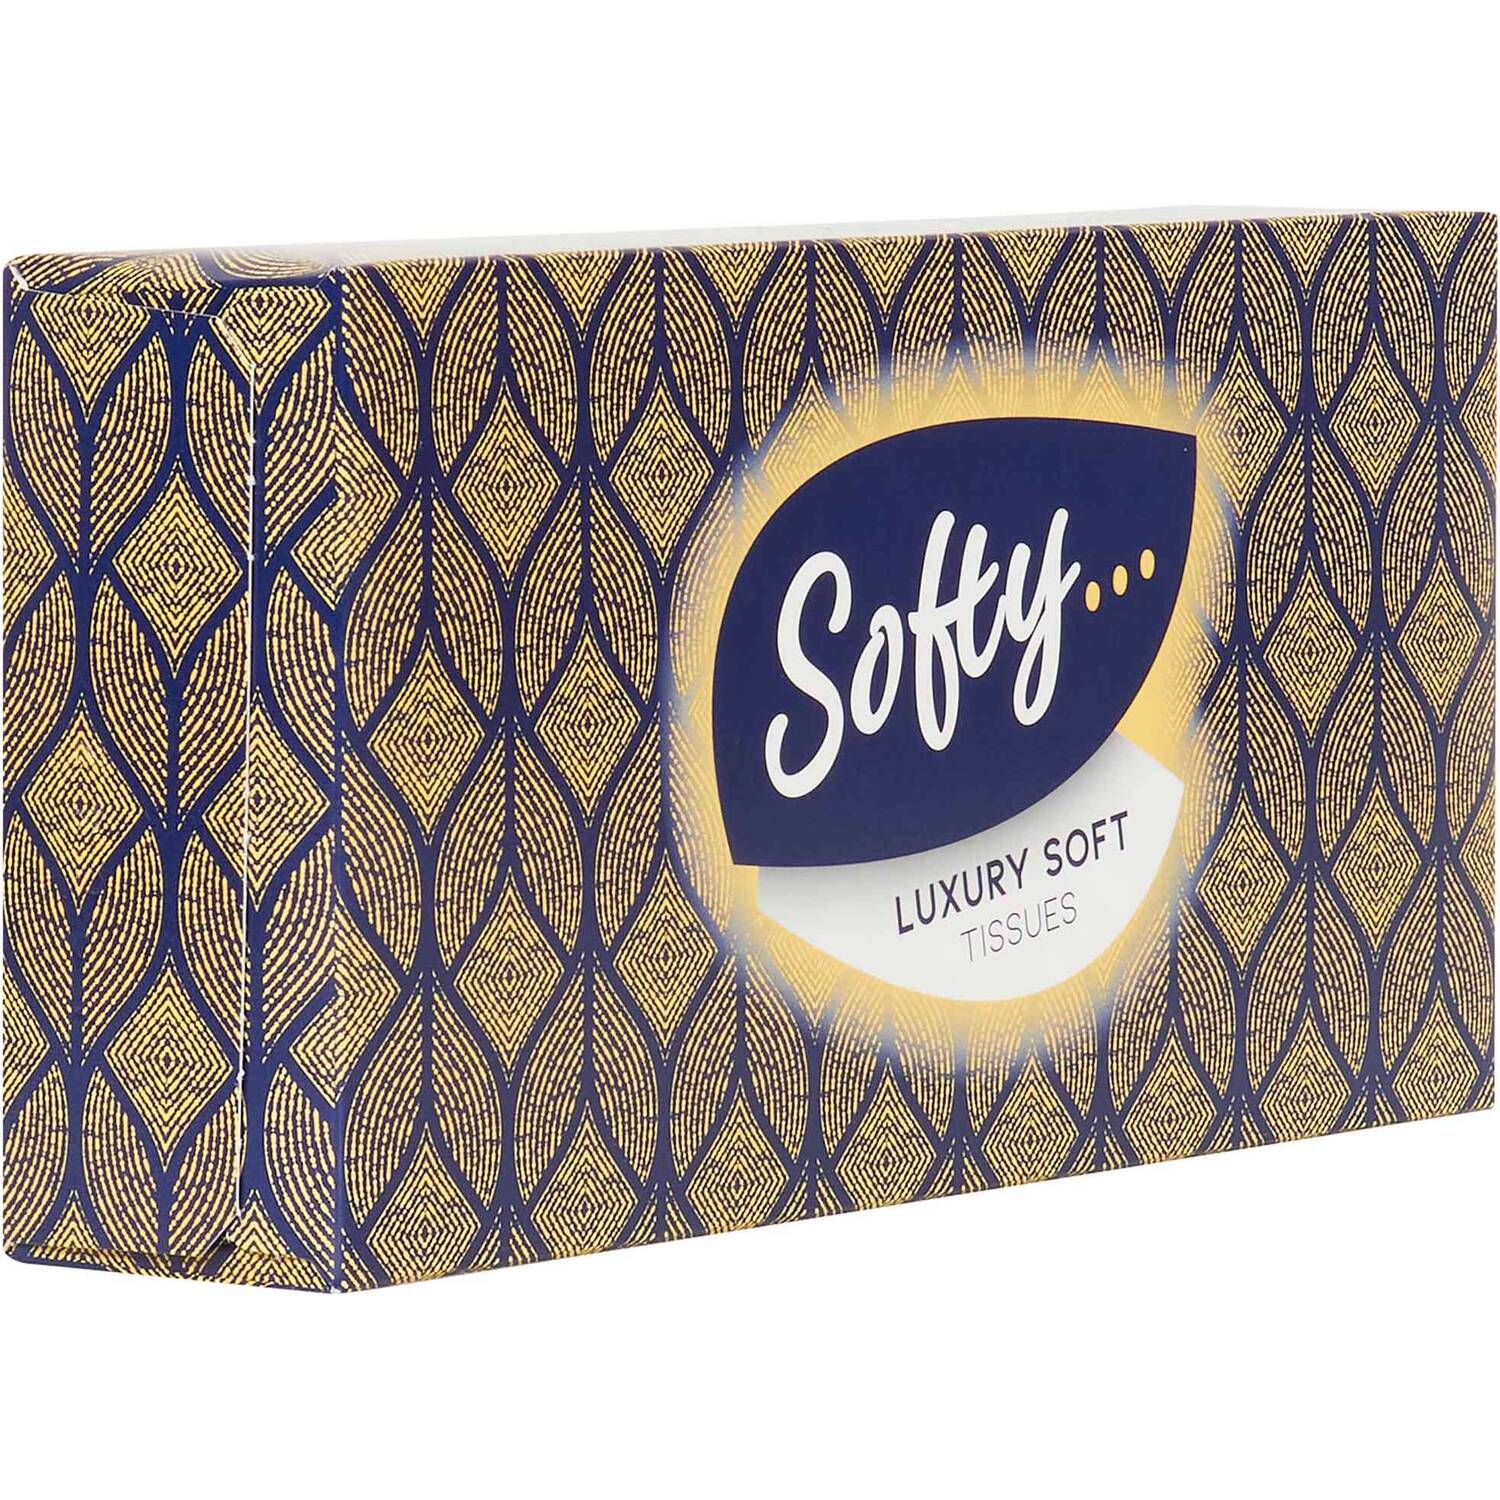 Softy Luxury Soft Tissues 72 Sheets 3 Ply Image 2